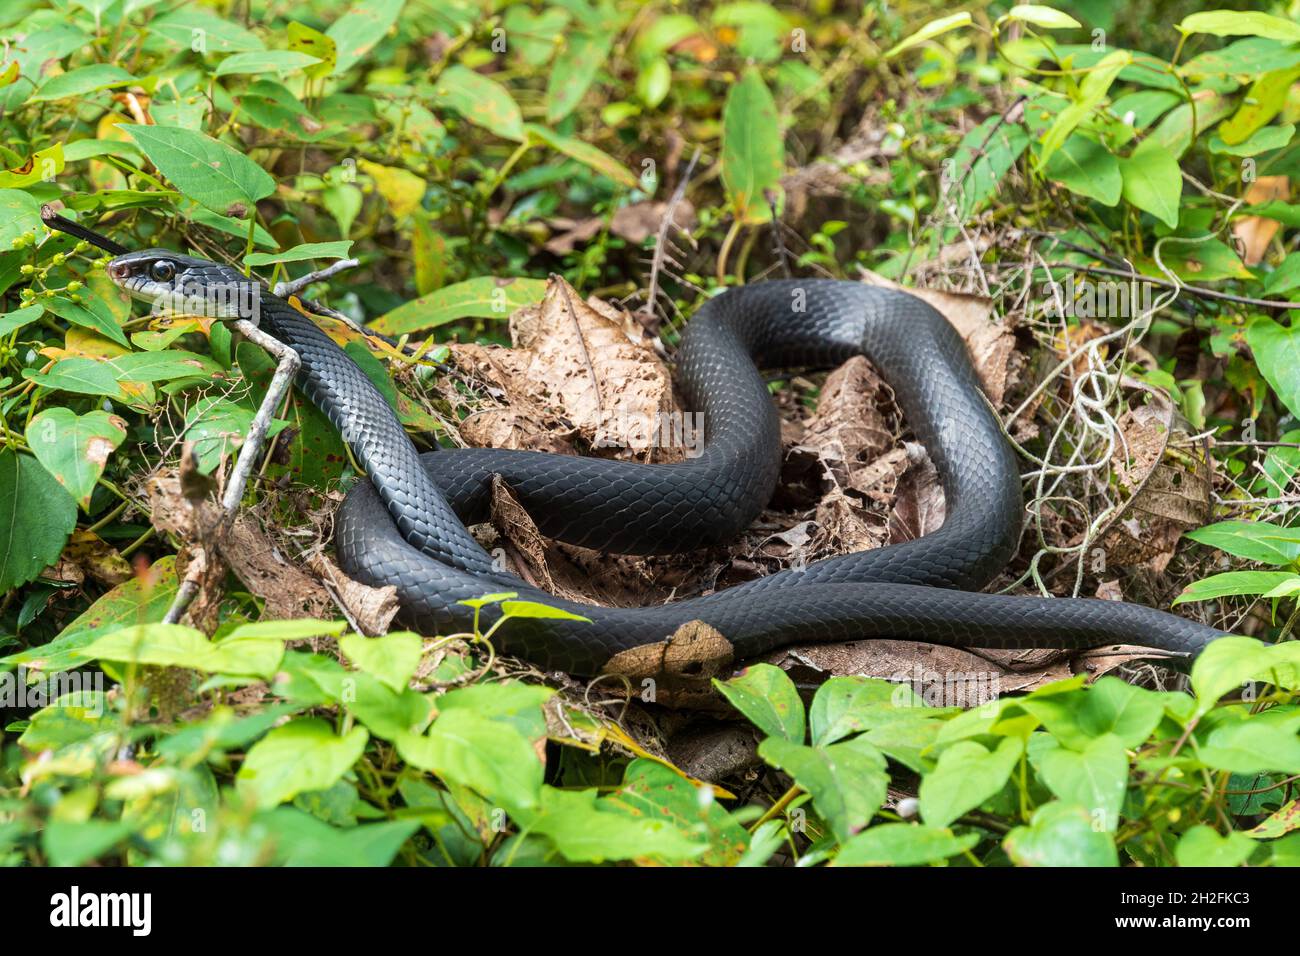 Southern black racer snake (Coluber constrictor priapus) lying on a bush - Rainbow Springs State Park, Dunnellon, Florida, USA Stock Photo